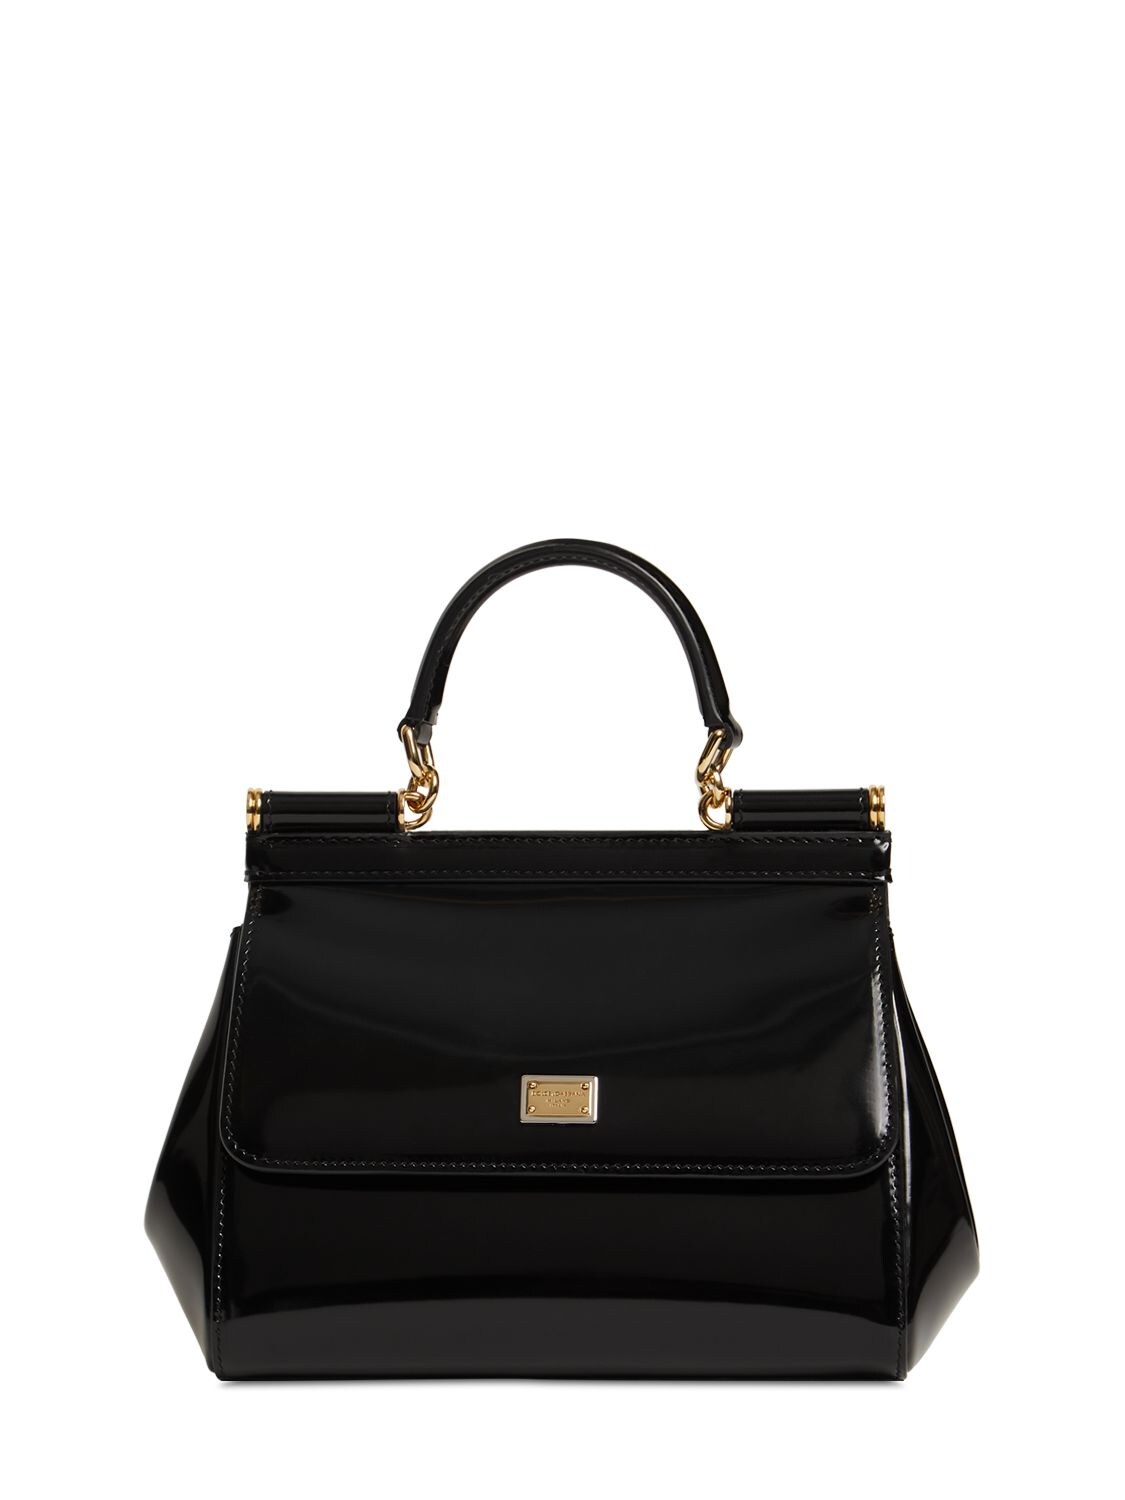 Dolce & Gabbana Small Sicily Bag In Black Patent Leather In 黑色 | ModeSens